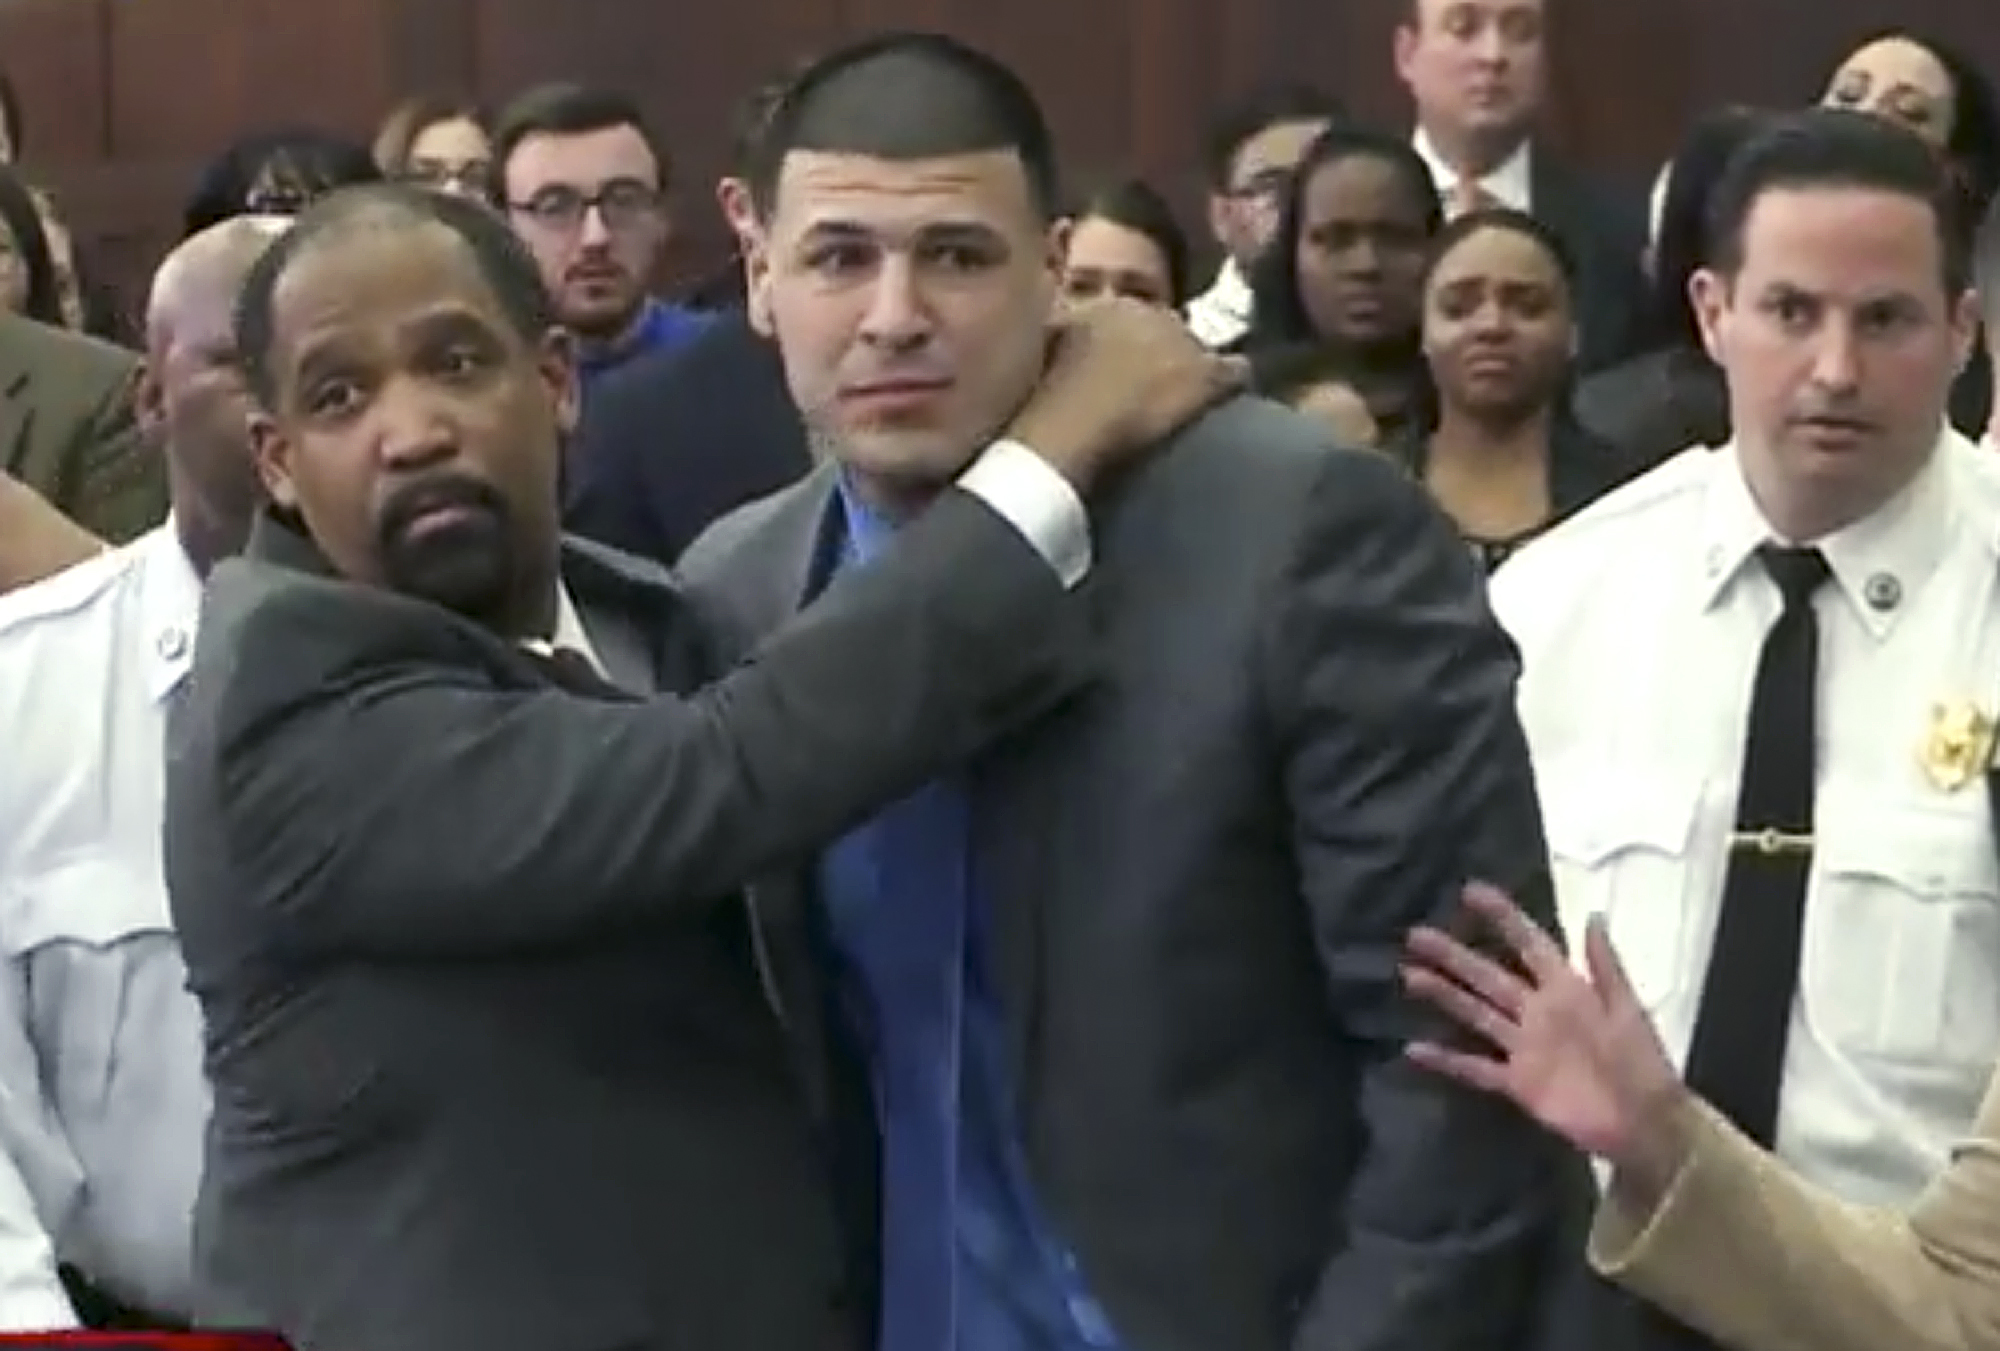 In this still image from video, Aaron Hernandez, center, is hugged by defense attorney Ronald Sullivan Friday, April 14, 2017, in court in Boston, after being found not guilty of murder in the 2012 shootings of two men in a drive-by shooting in Boston. (WHDH-TV via AP, Pool)